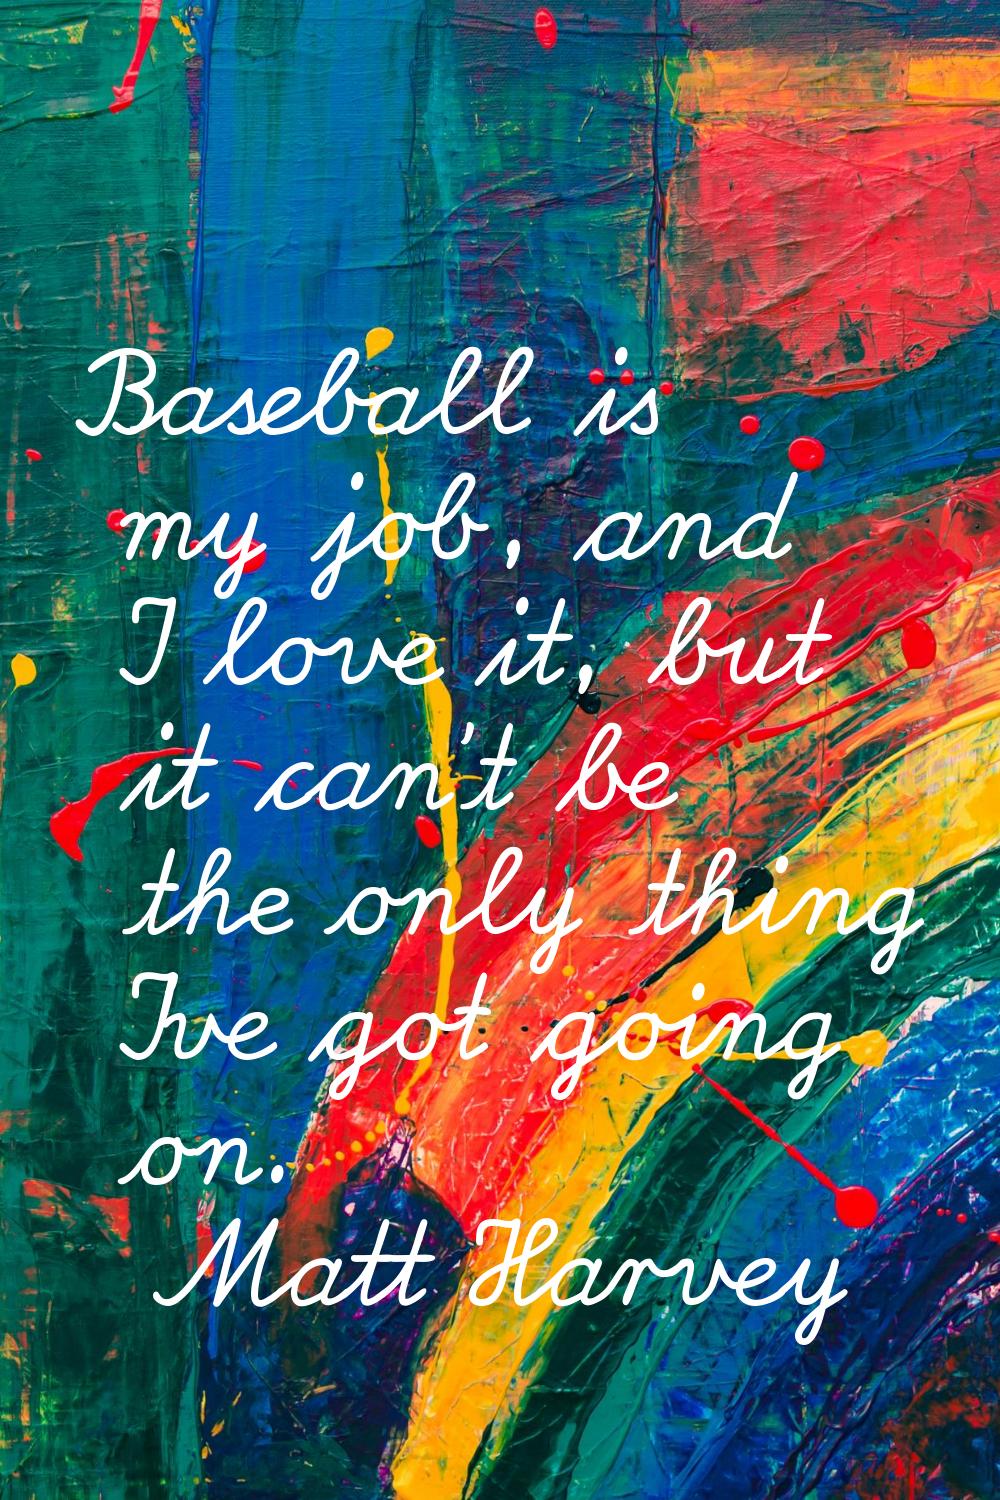 Baseball is my job, and I love it, but it can't be the only thing I've got going on.